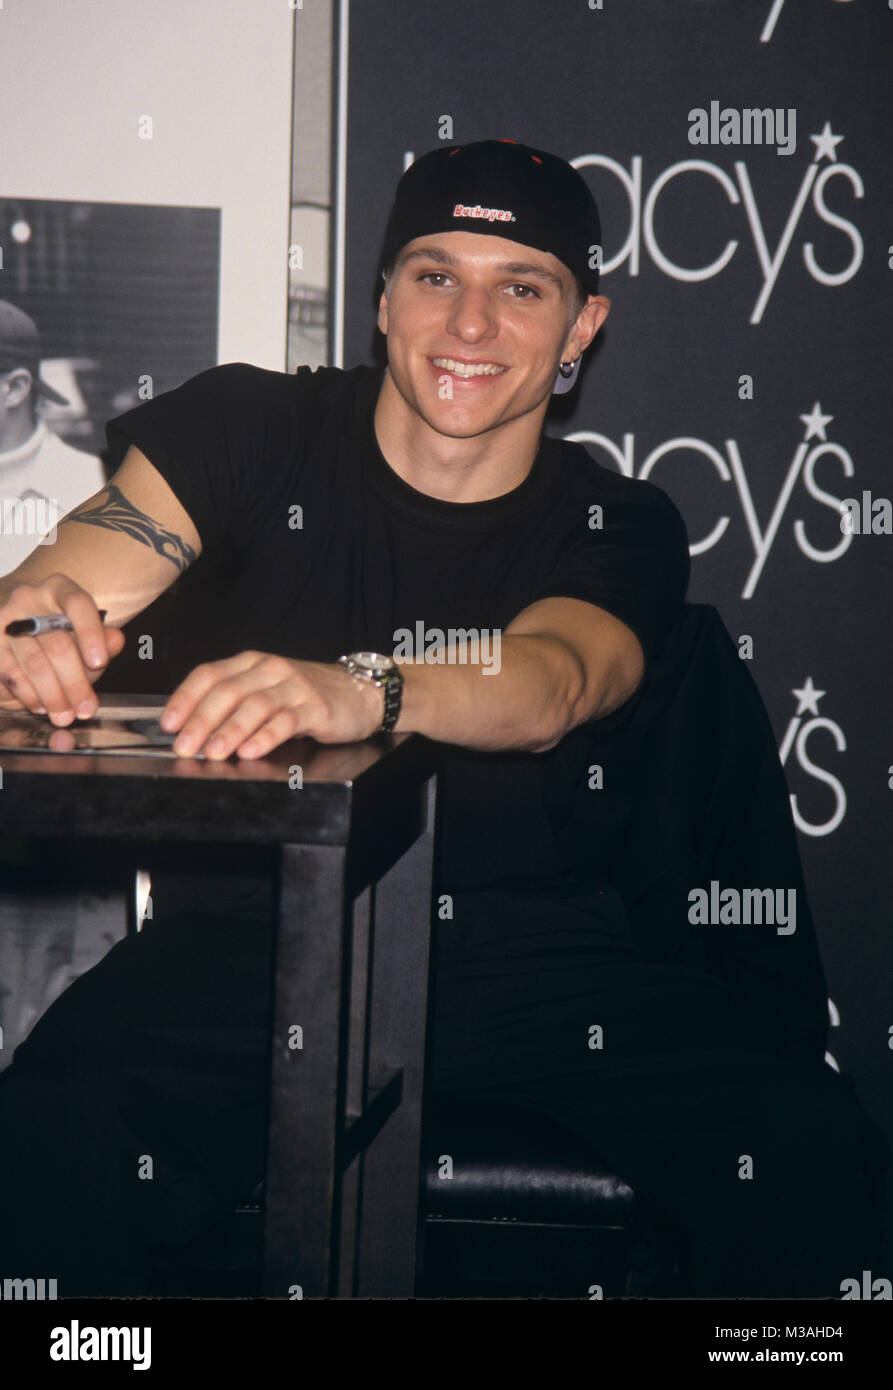 https://c8.alamy.com/comp/M3AHD4/drew-lachey-of-98-degrees-at-an-autograph-signing-at-macys-in-new-M3AHD4.jpg